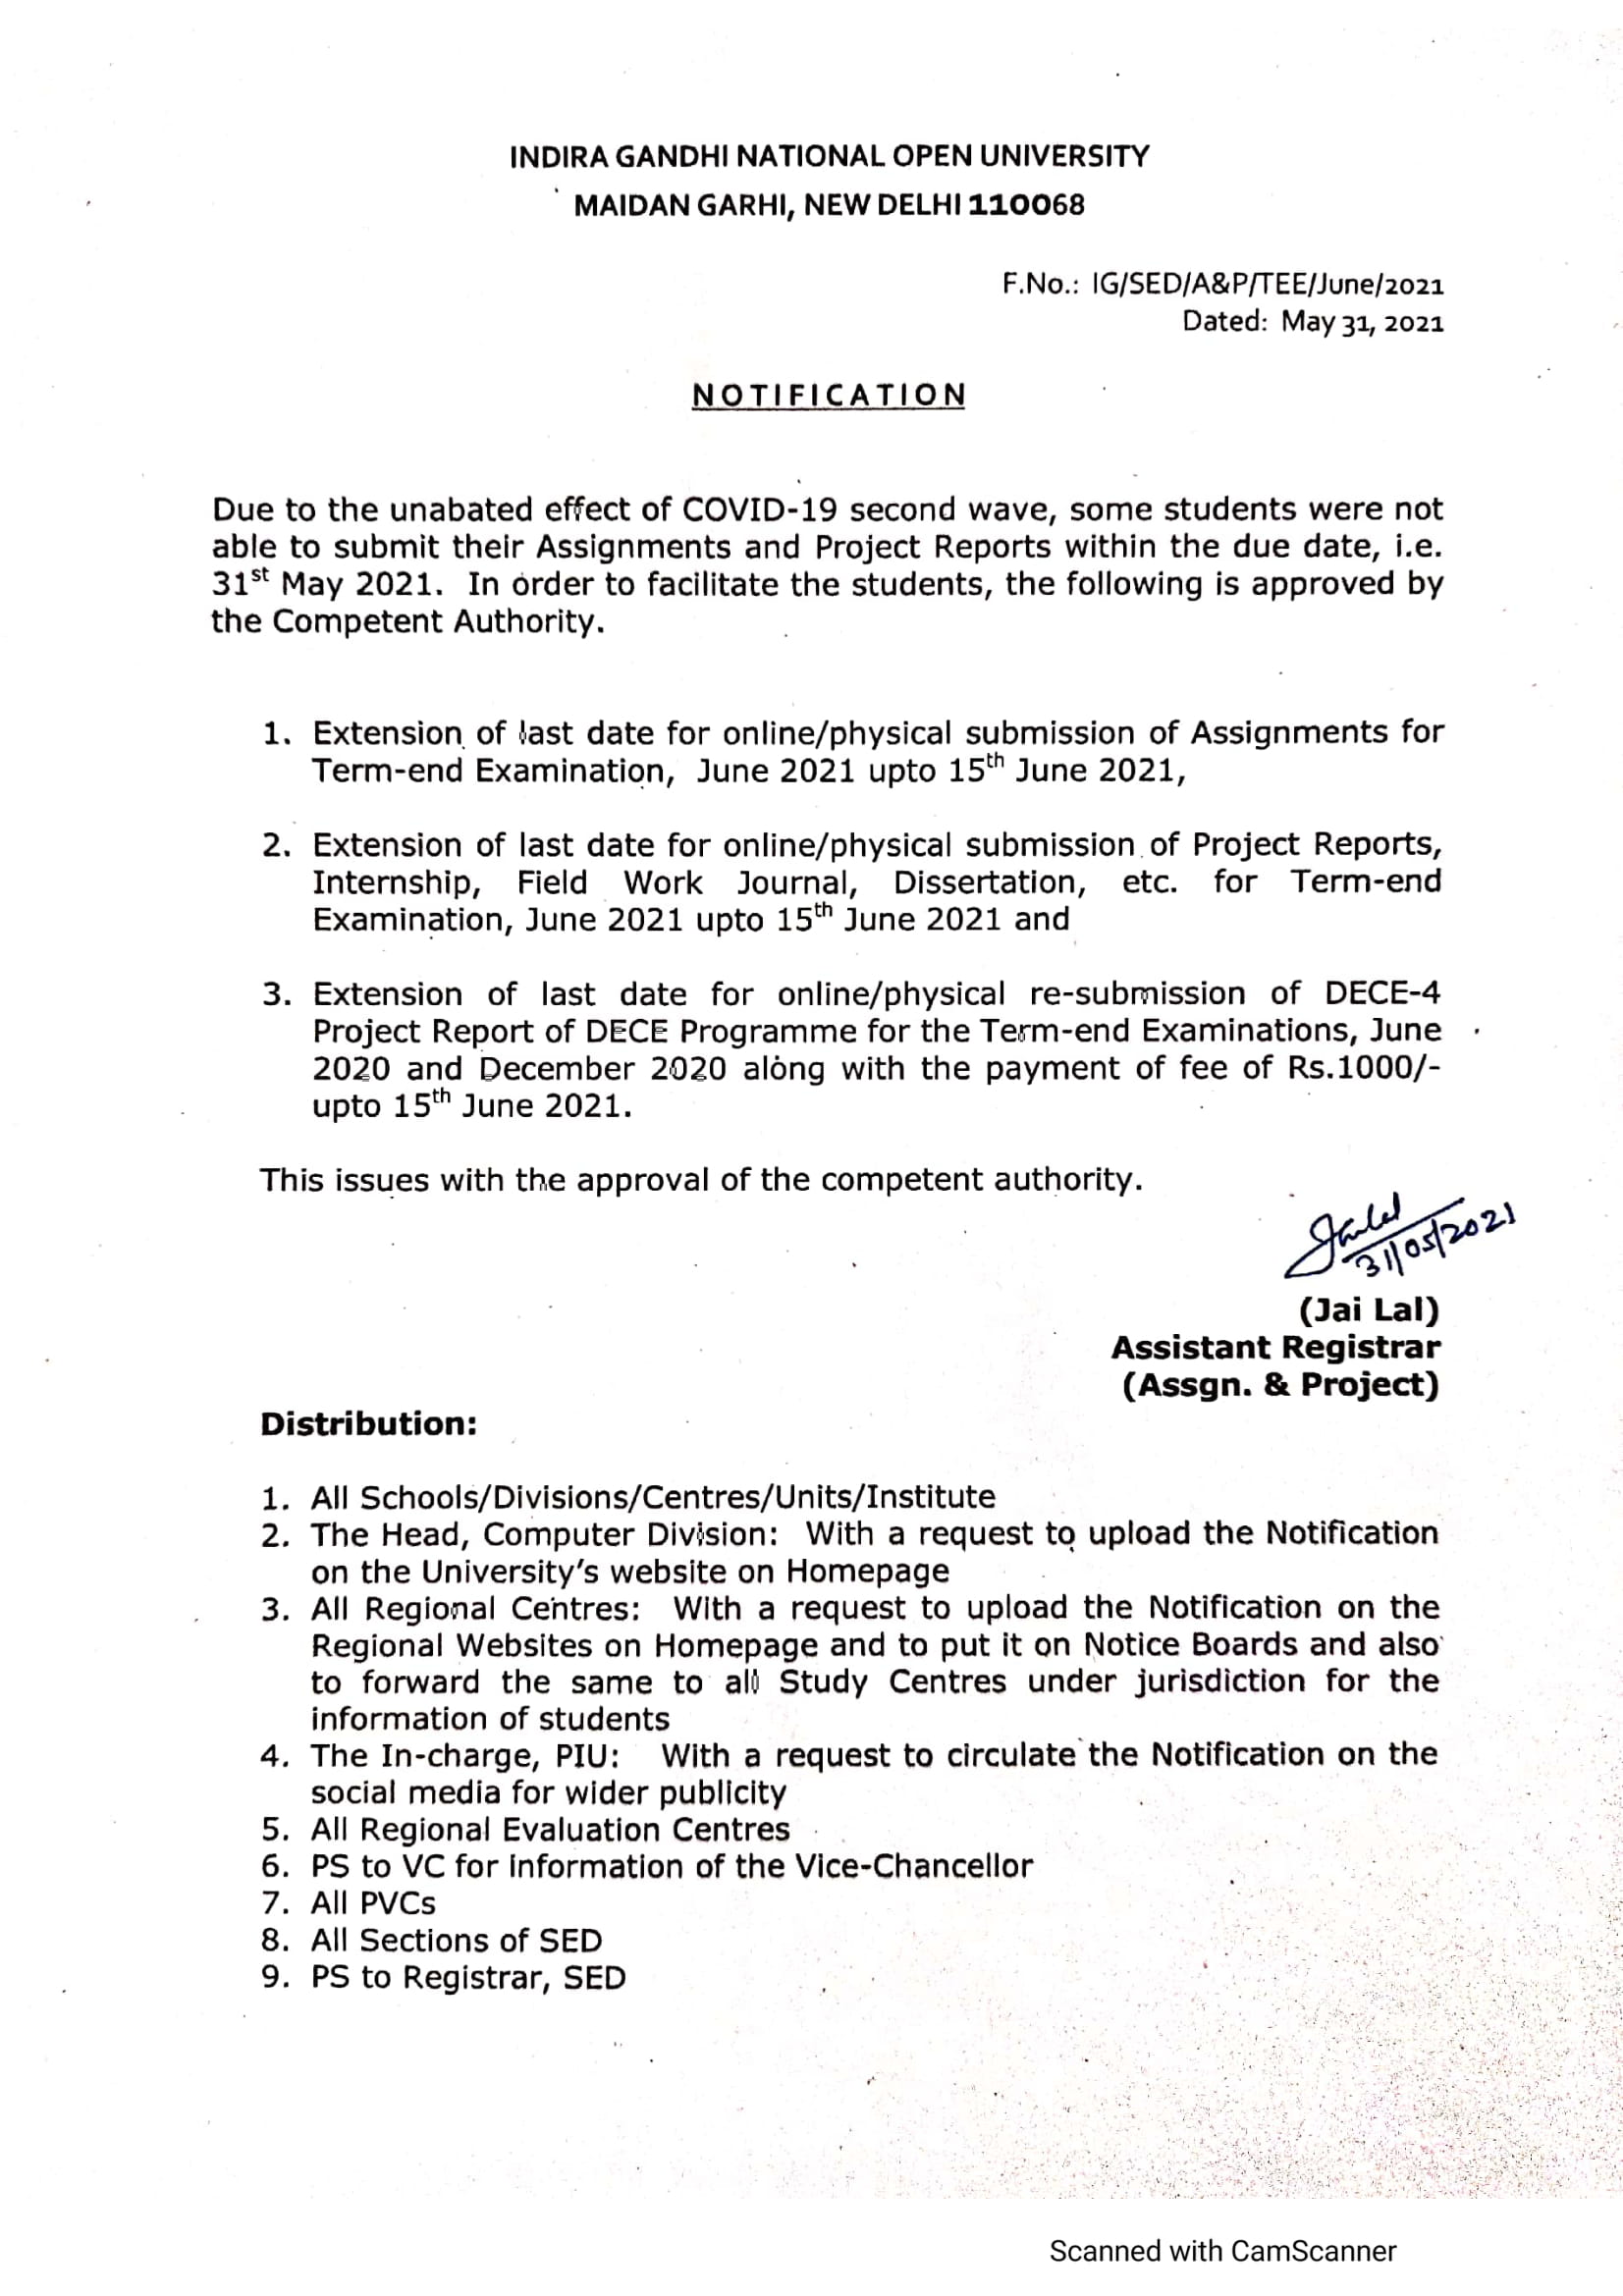 ignou notice 31 may 2021